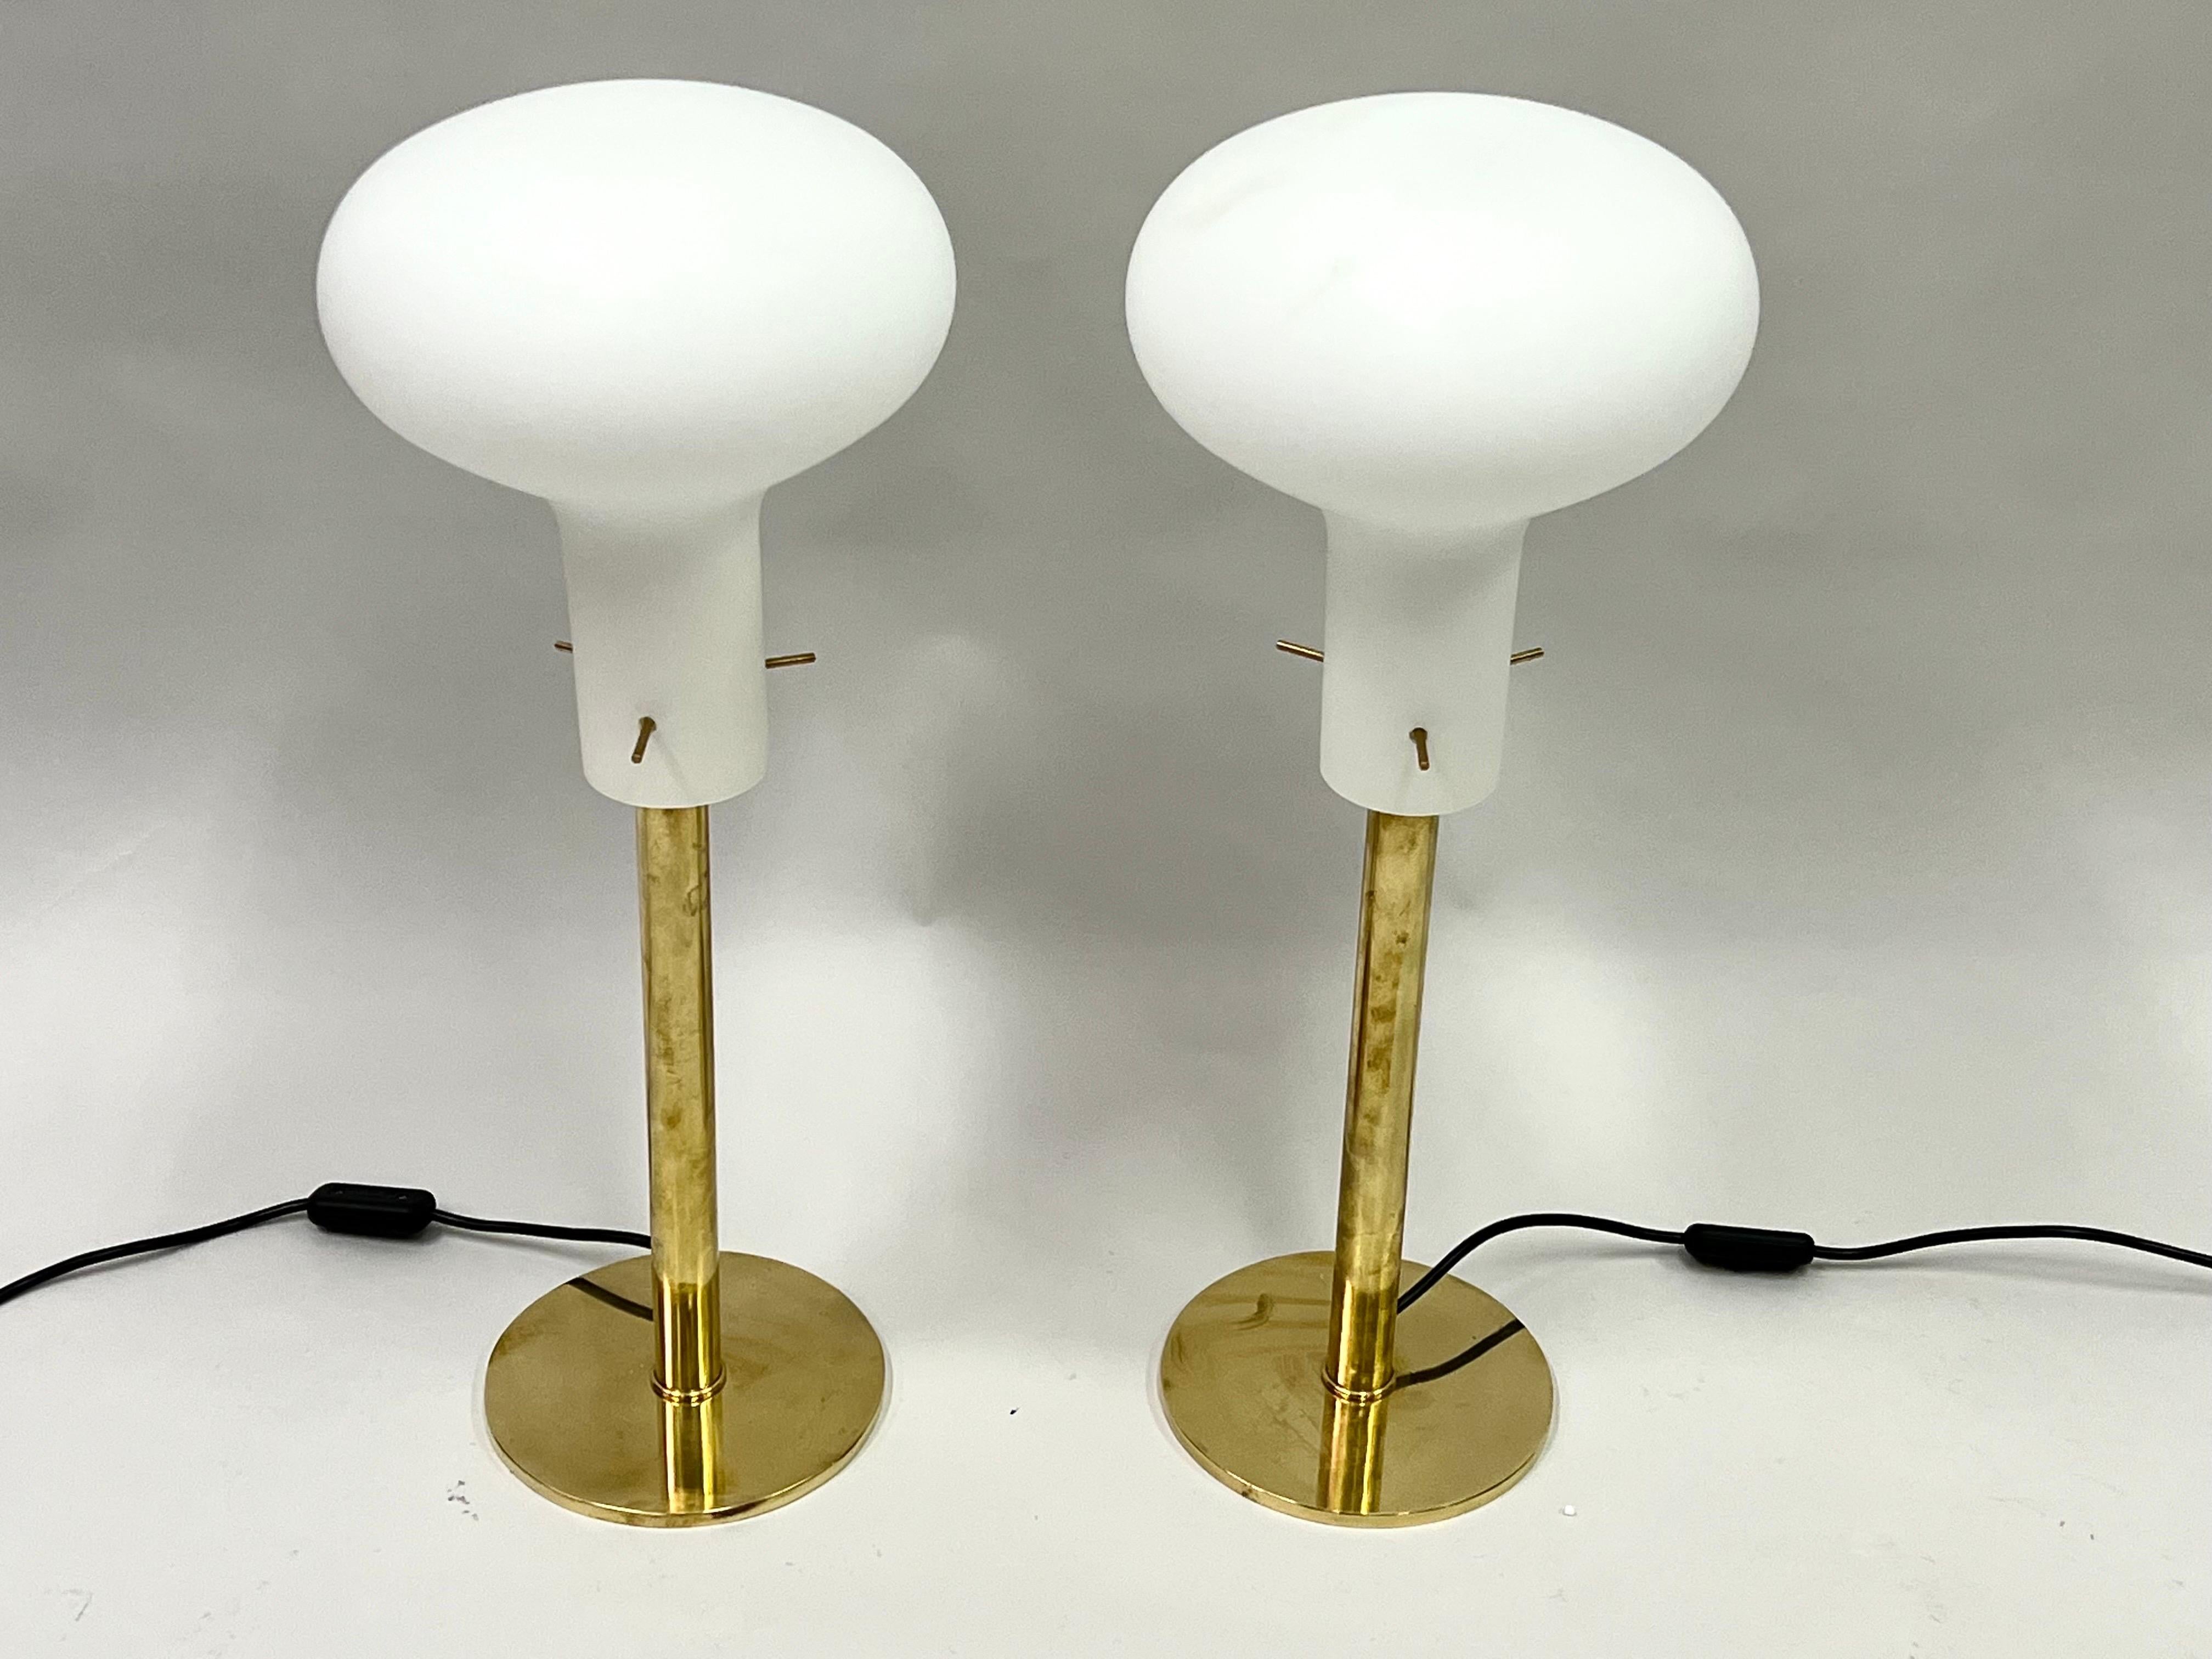 Hand-Crafted Pair of Italian Mid-Century Modern Brass Table Lamps, Max Ingrand & Fontana Arte For Sale